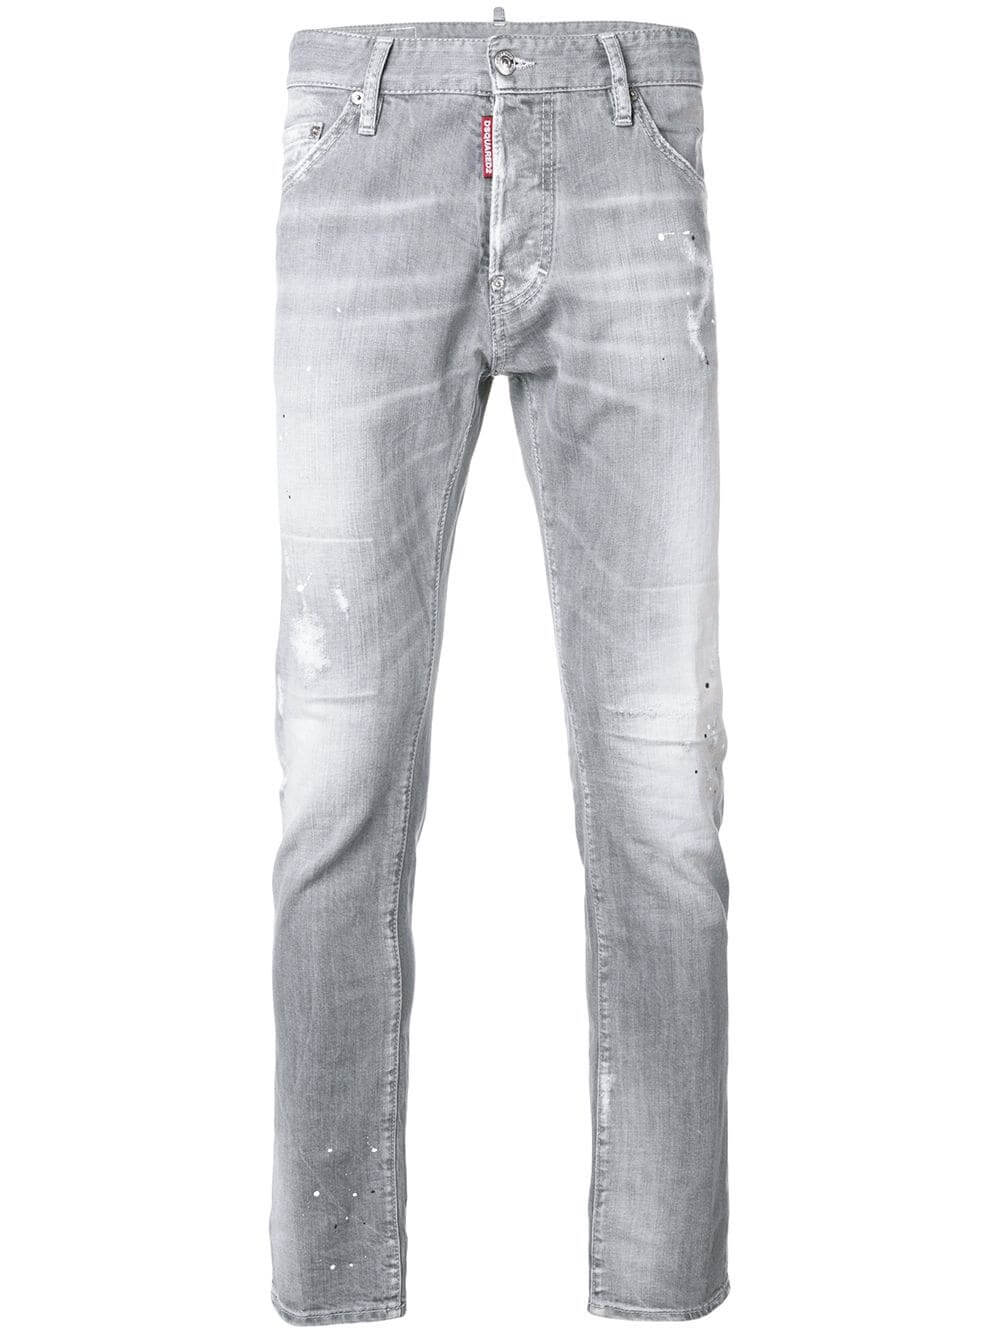 Gray Jeans - Men's Codes! Introducing mature outfits and items that are ...